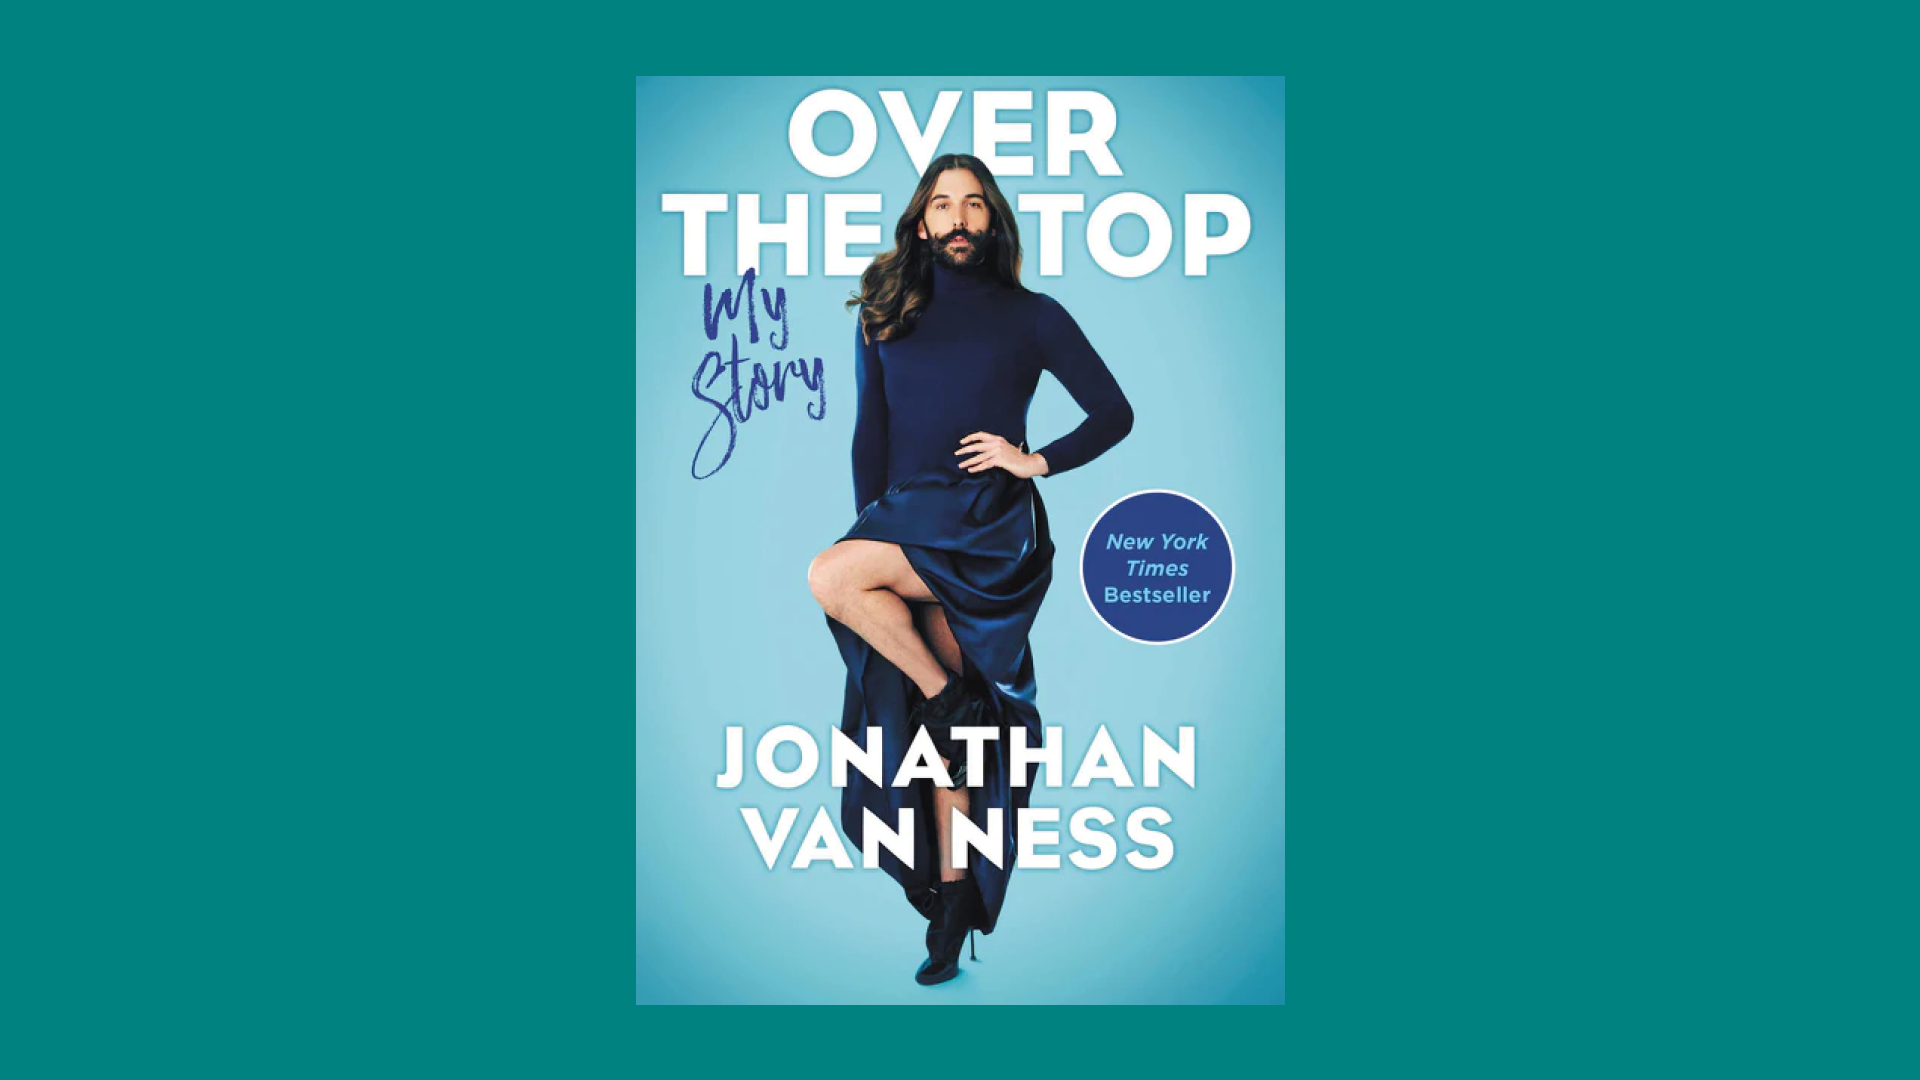 “Over the Top” by Jonathan Van Ness